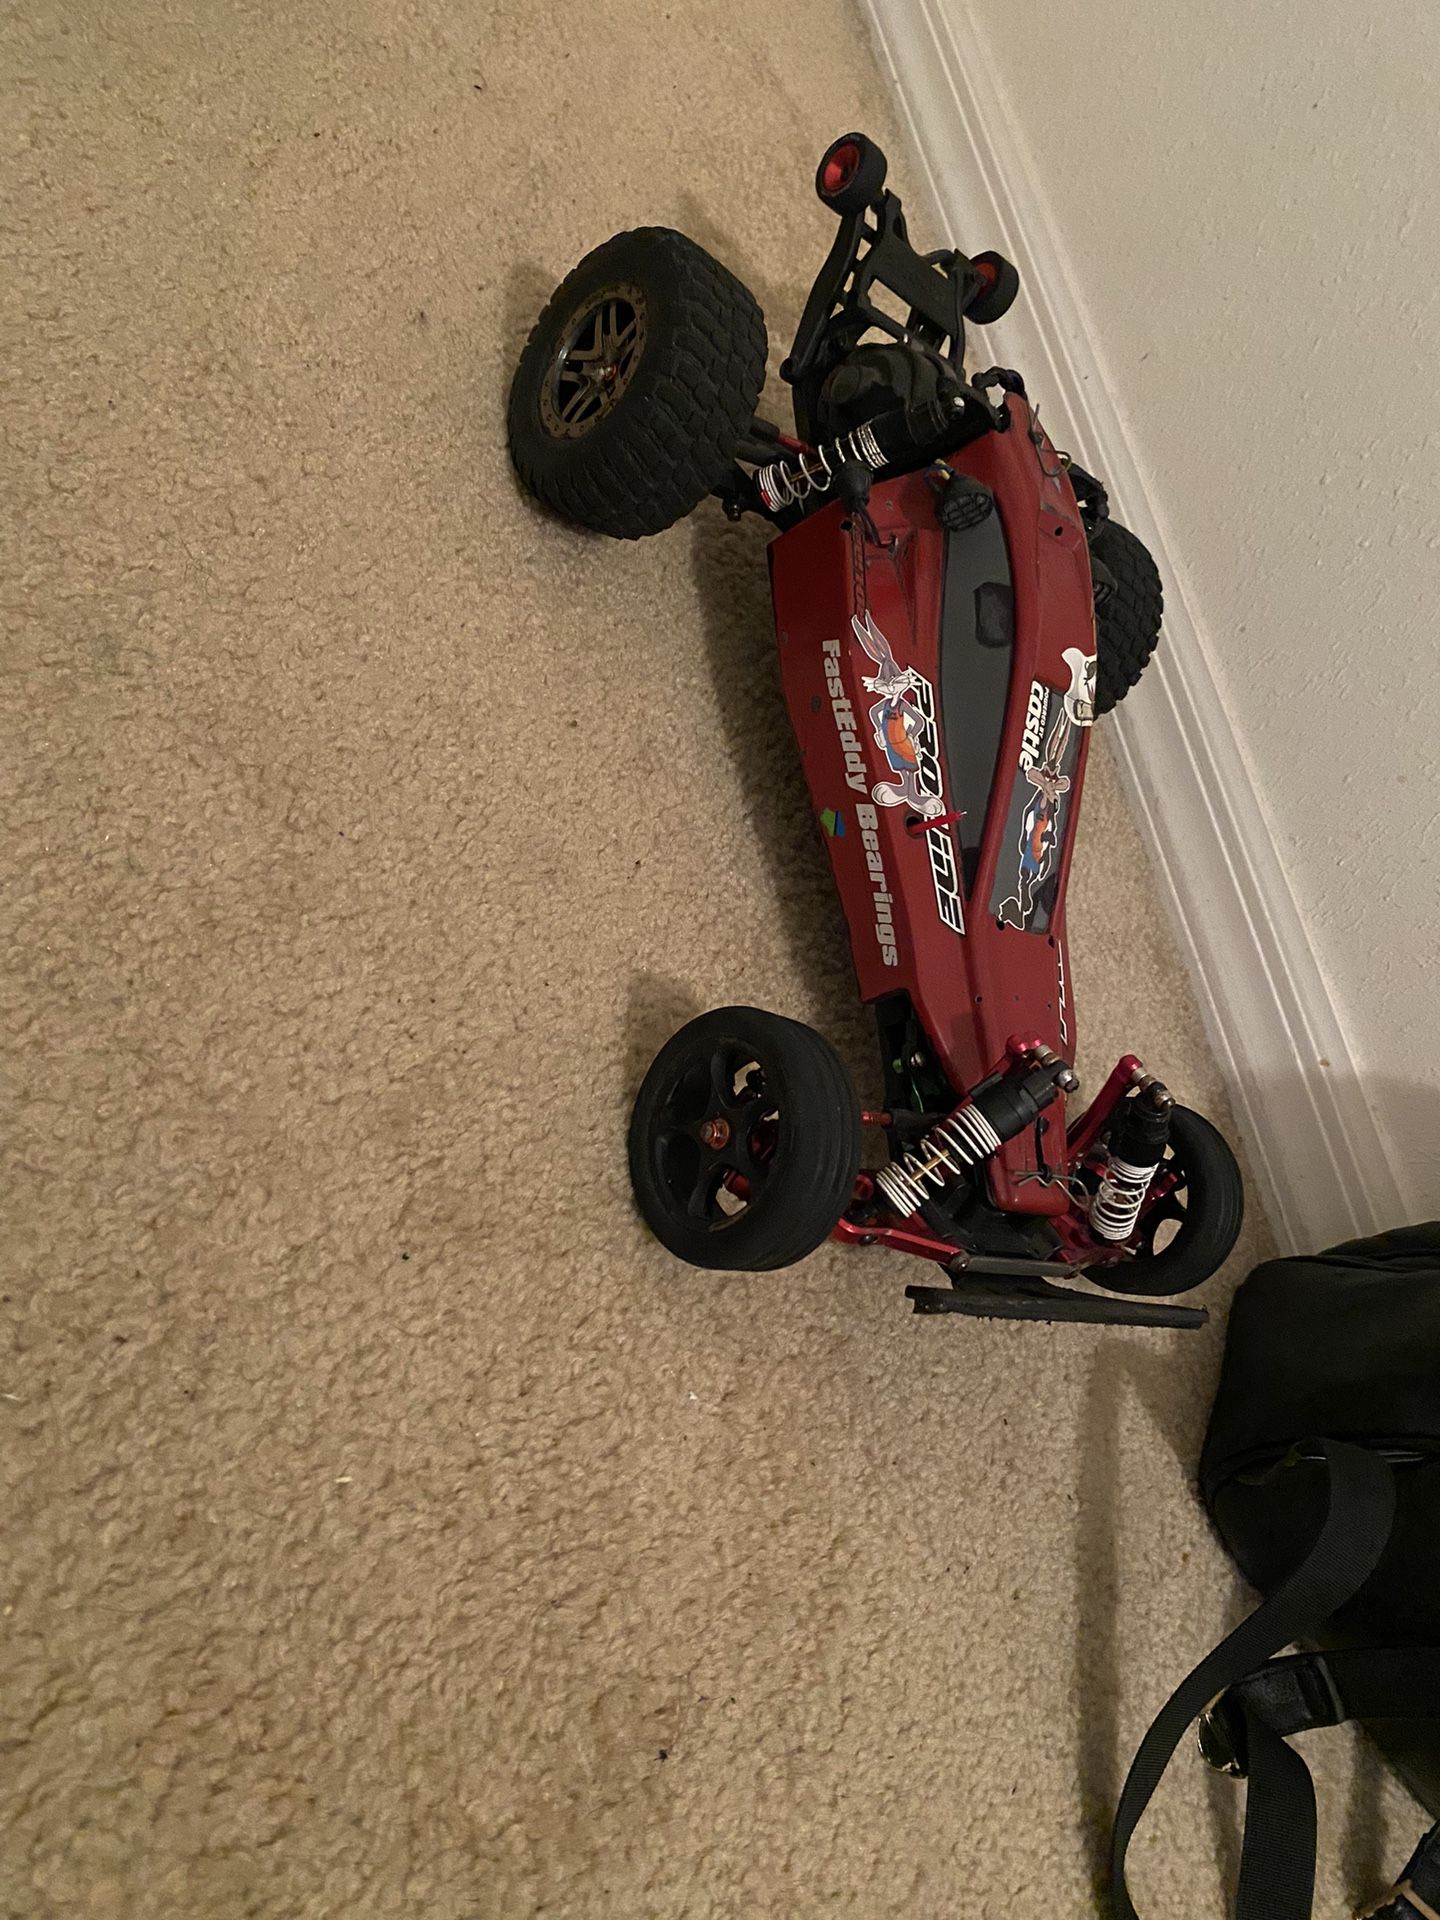 Traxxas Bandit 3s With Castle Motor Comes With Controller, Charger,an Battery 